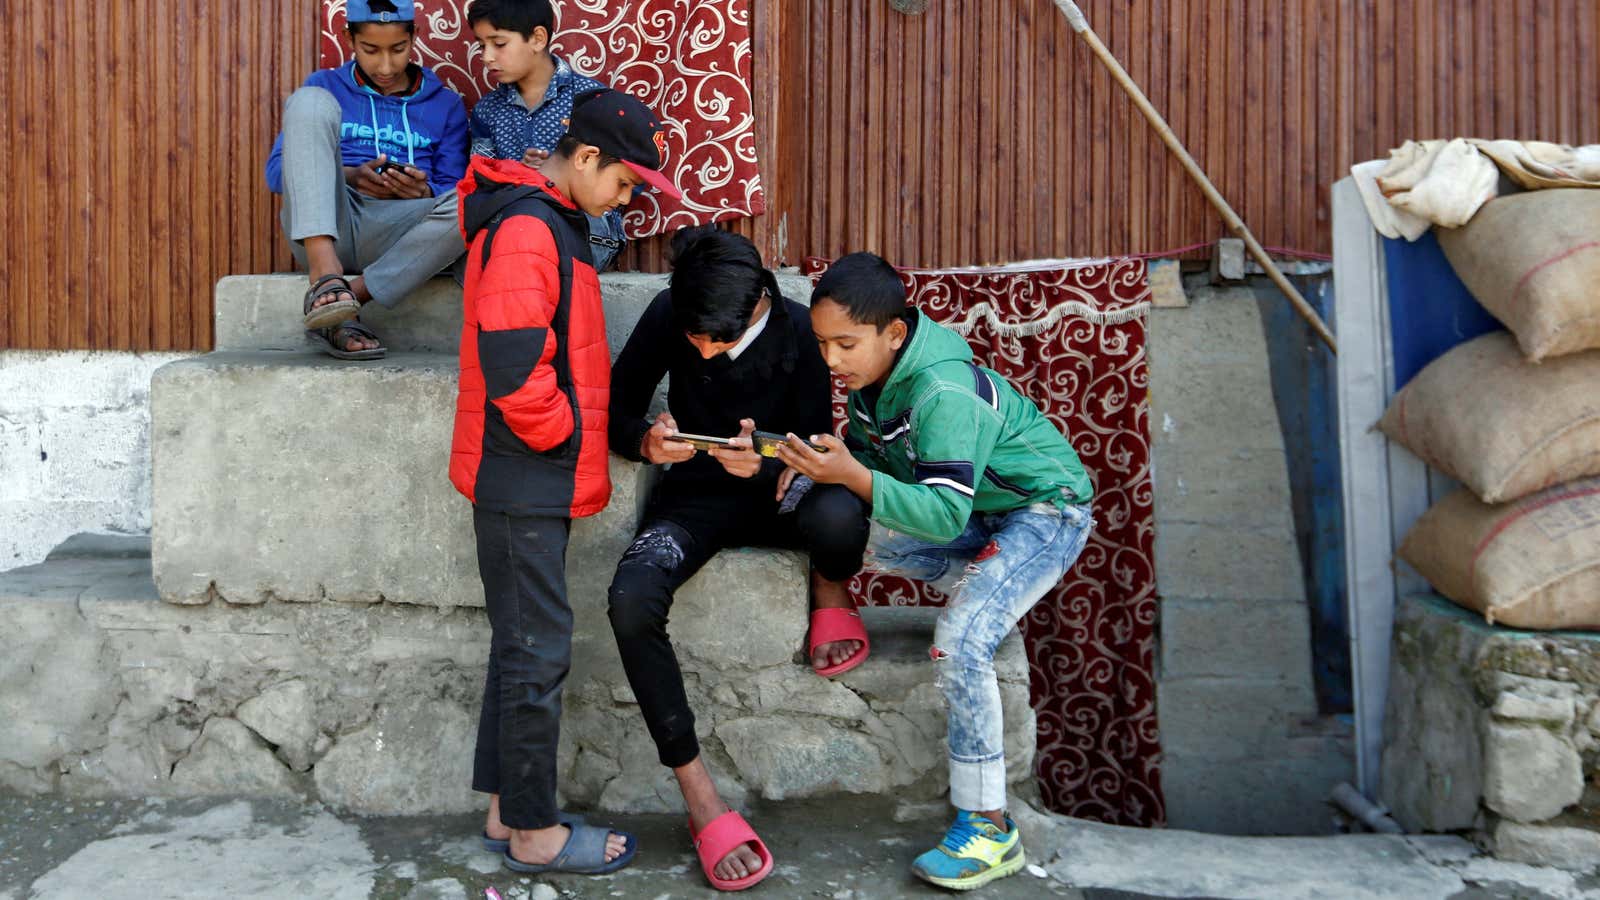 Children play games on their mobile phones.